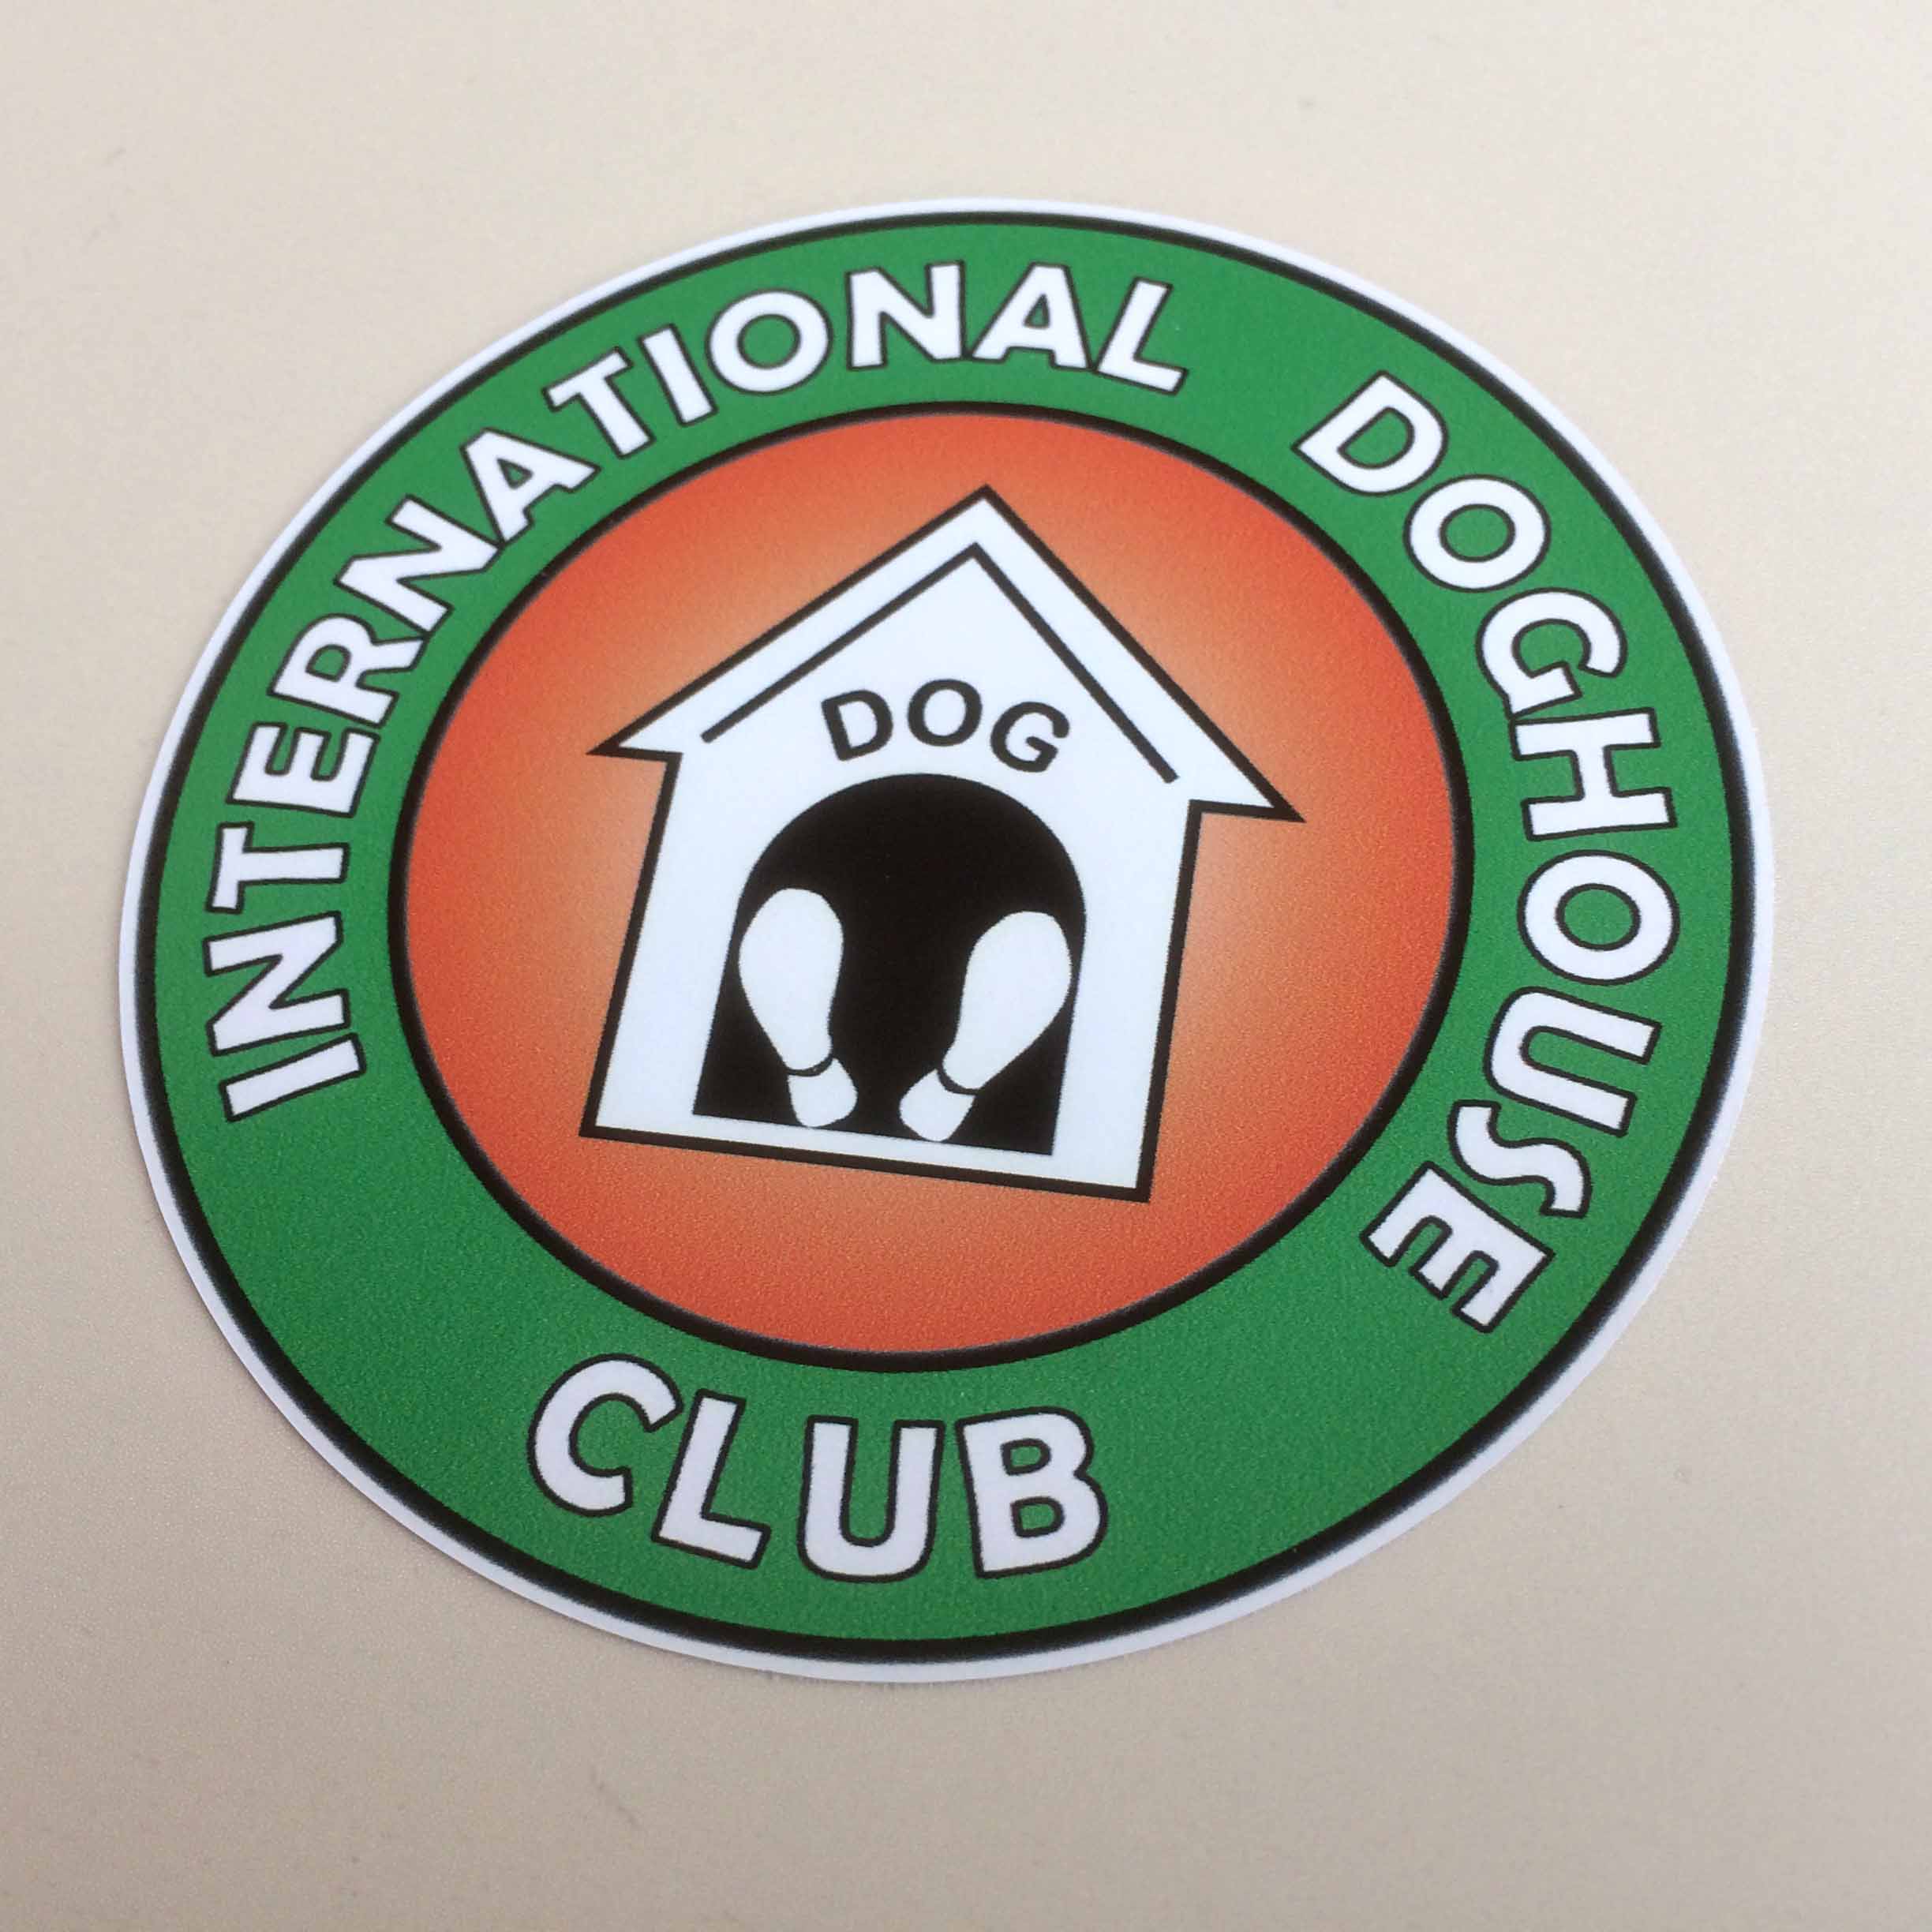 International Doghouse Club in white lettering on a green outer circle surrounds a white kennel on an orange background. The soles of two feet are in the doorway with the word Dog above it.